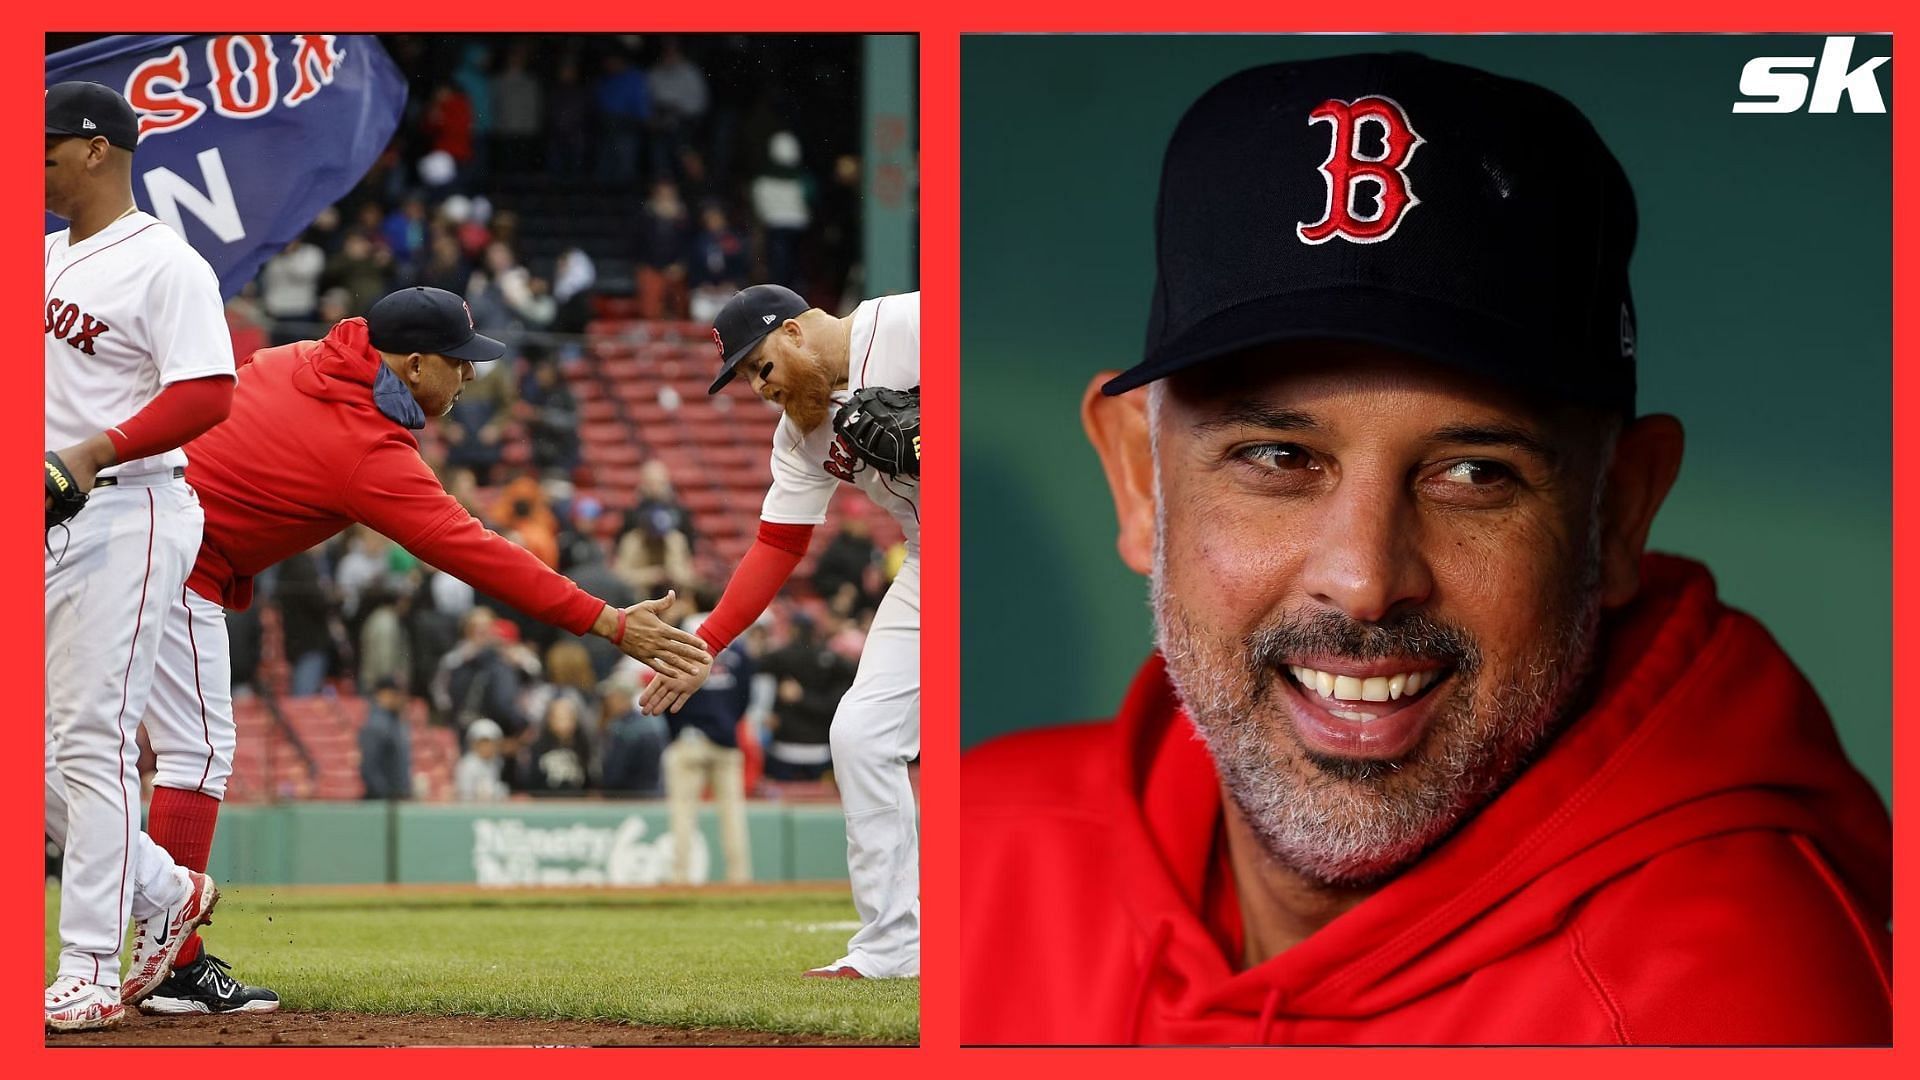 When ex-Houston Astros coach Alex Cora unleashed scathing critique for being grossly underpaid during 2017 championship season